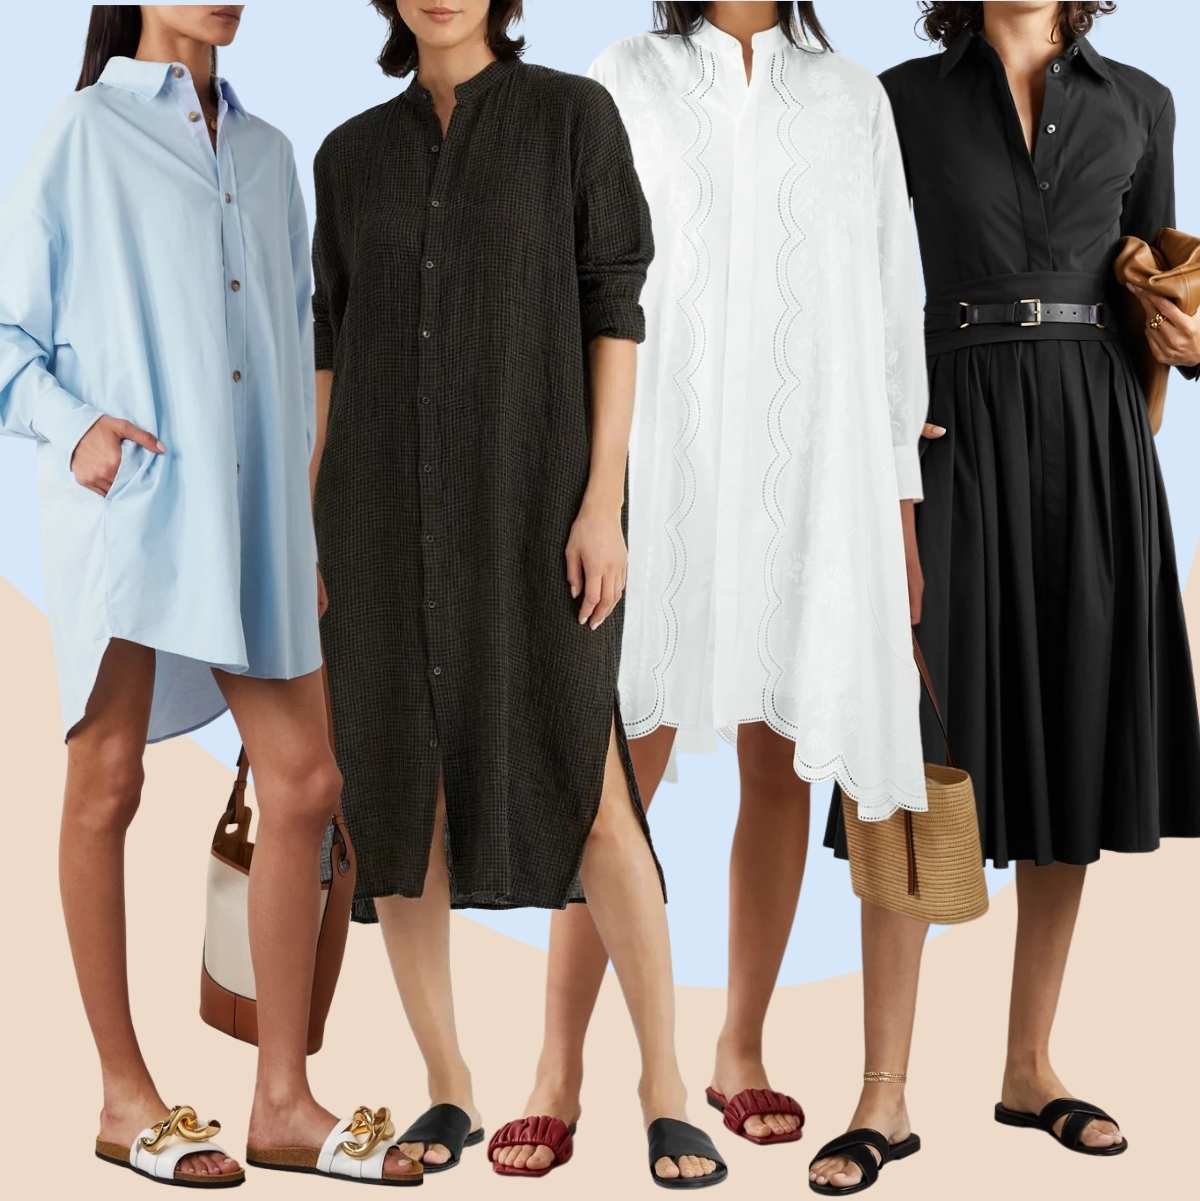 Collage of 4 women wearing different slides with a shirt dress.